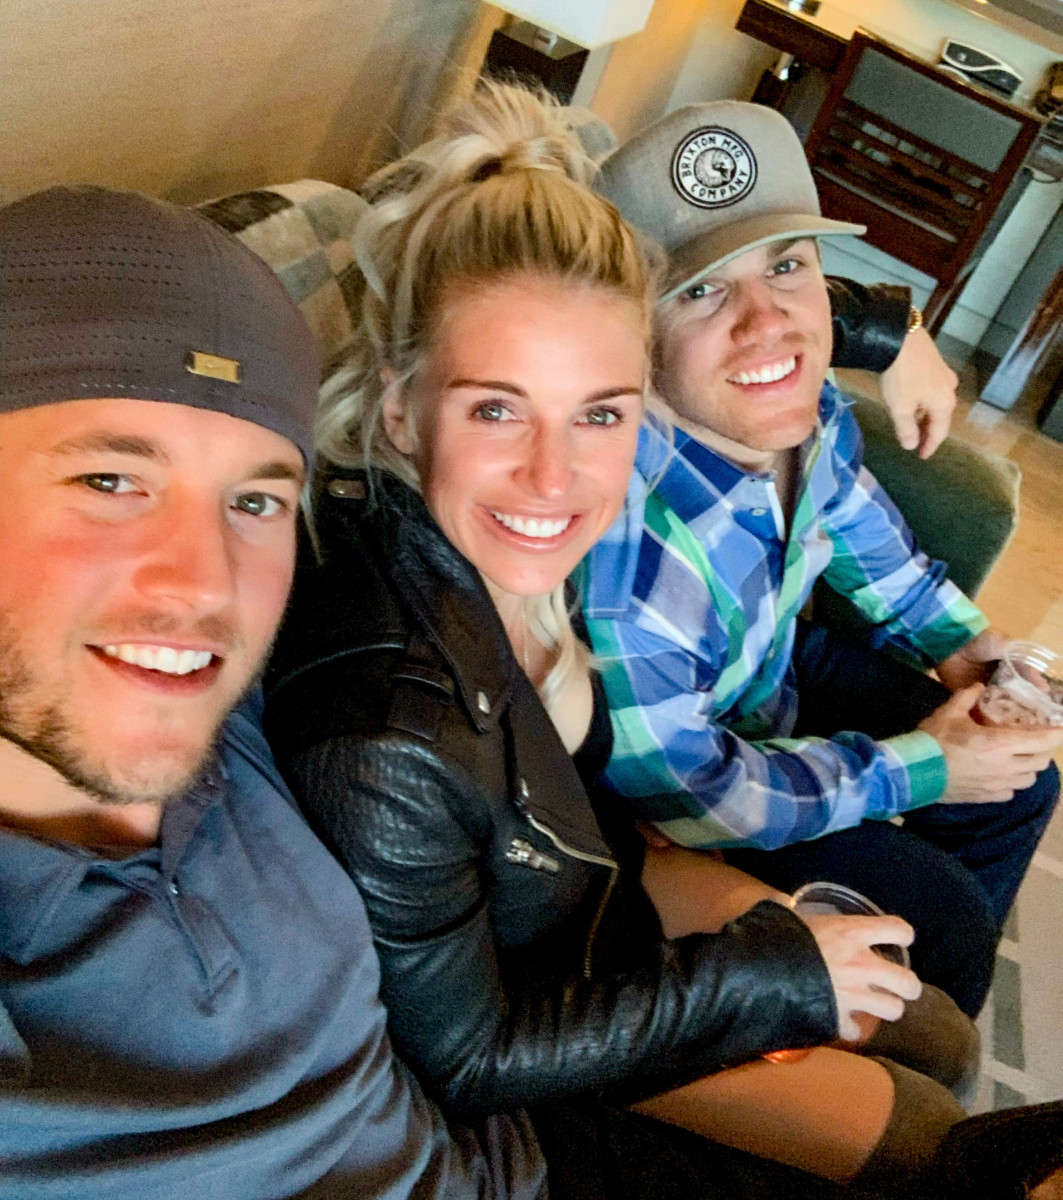 Matthew Stafford, Kelly Stafford, and Chad Hall pose for a selfie on a couch